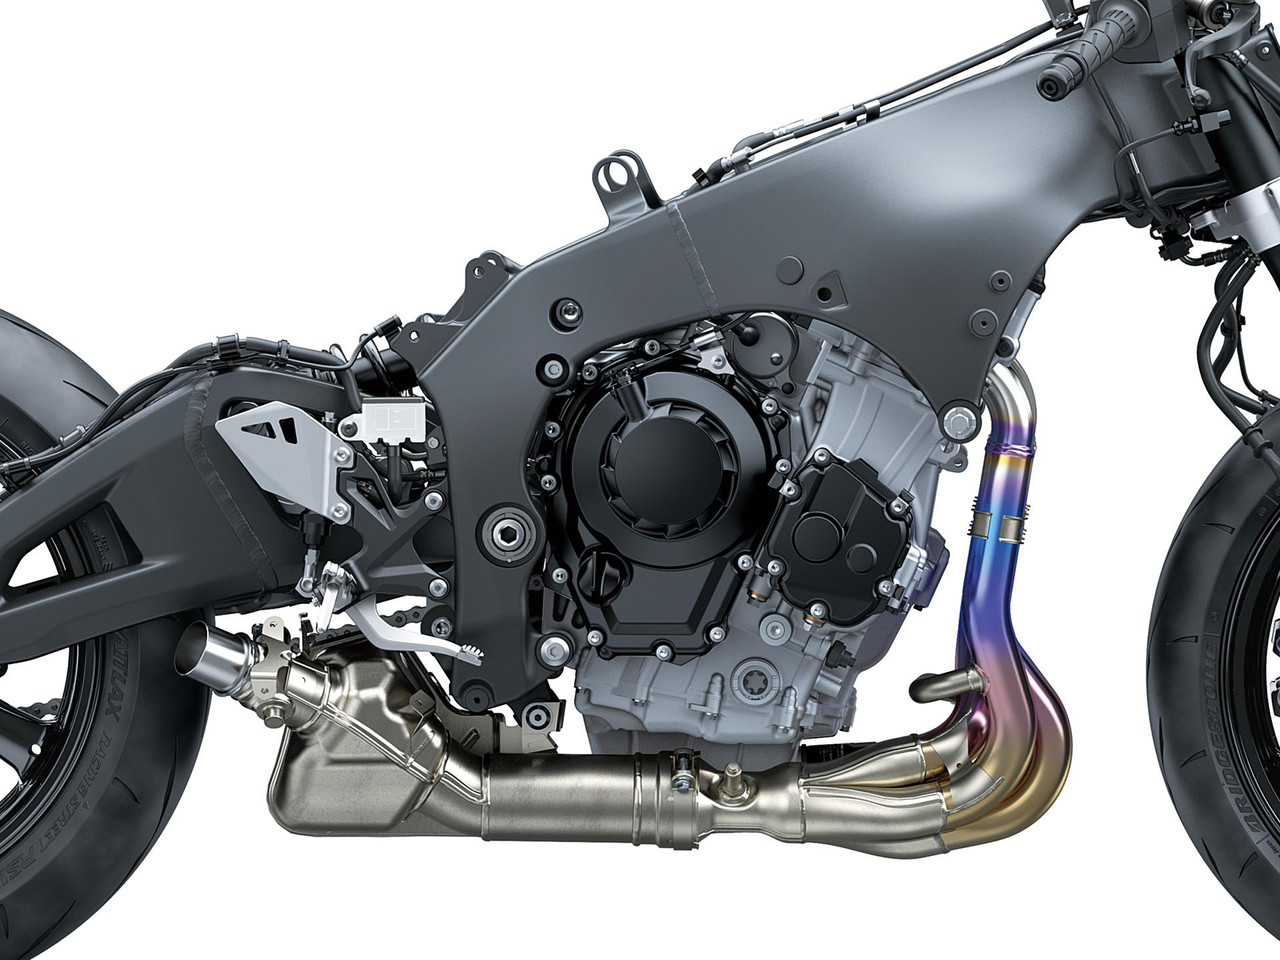 Powerful 998 cm3 Liquid-Cooled, 4-Stroke In-Line Four